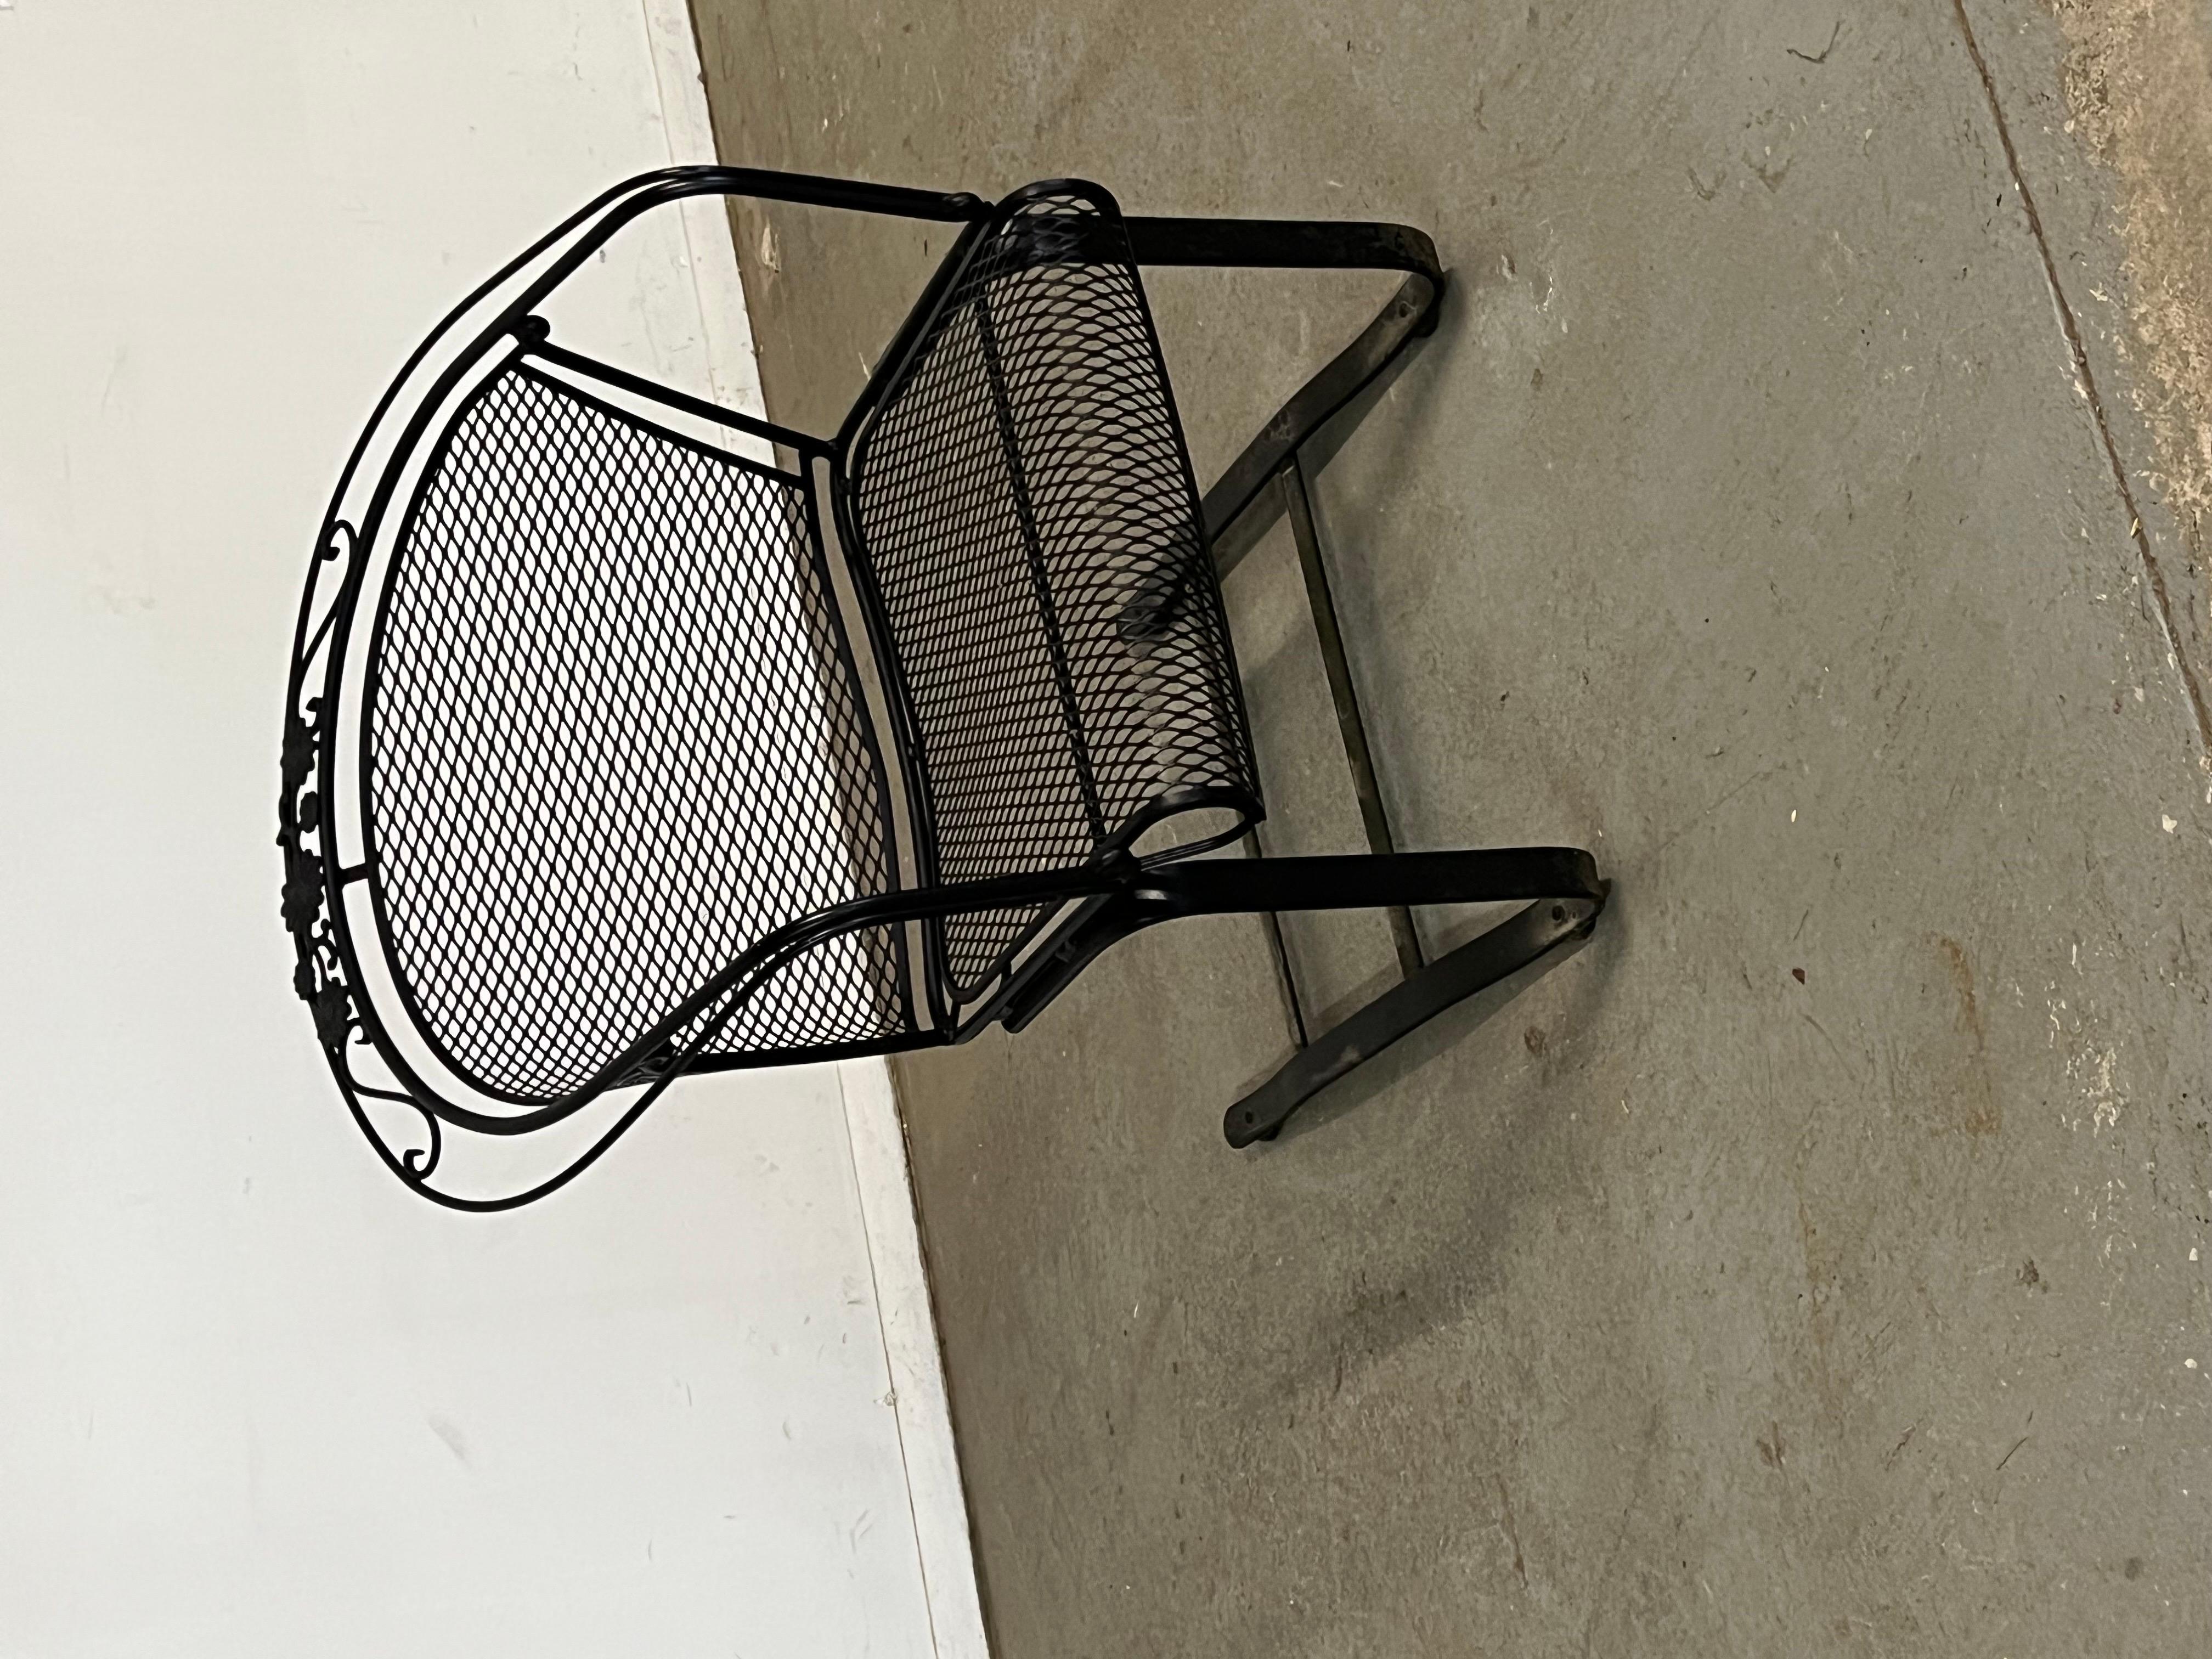 Vintage Mid-Century Salterini Curve Back Outdoor Cantilever/Springer Arm Chair
Offered is a Vintage Mid-Century Salterini Curve Back Outdoor Cantilever/Springer Arm Chair in the style of Salterini(circa 1960's). Features enameled and woven wrought